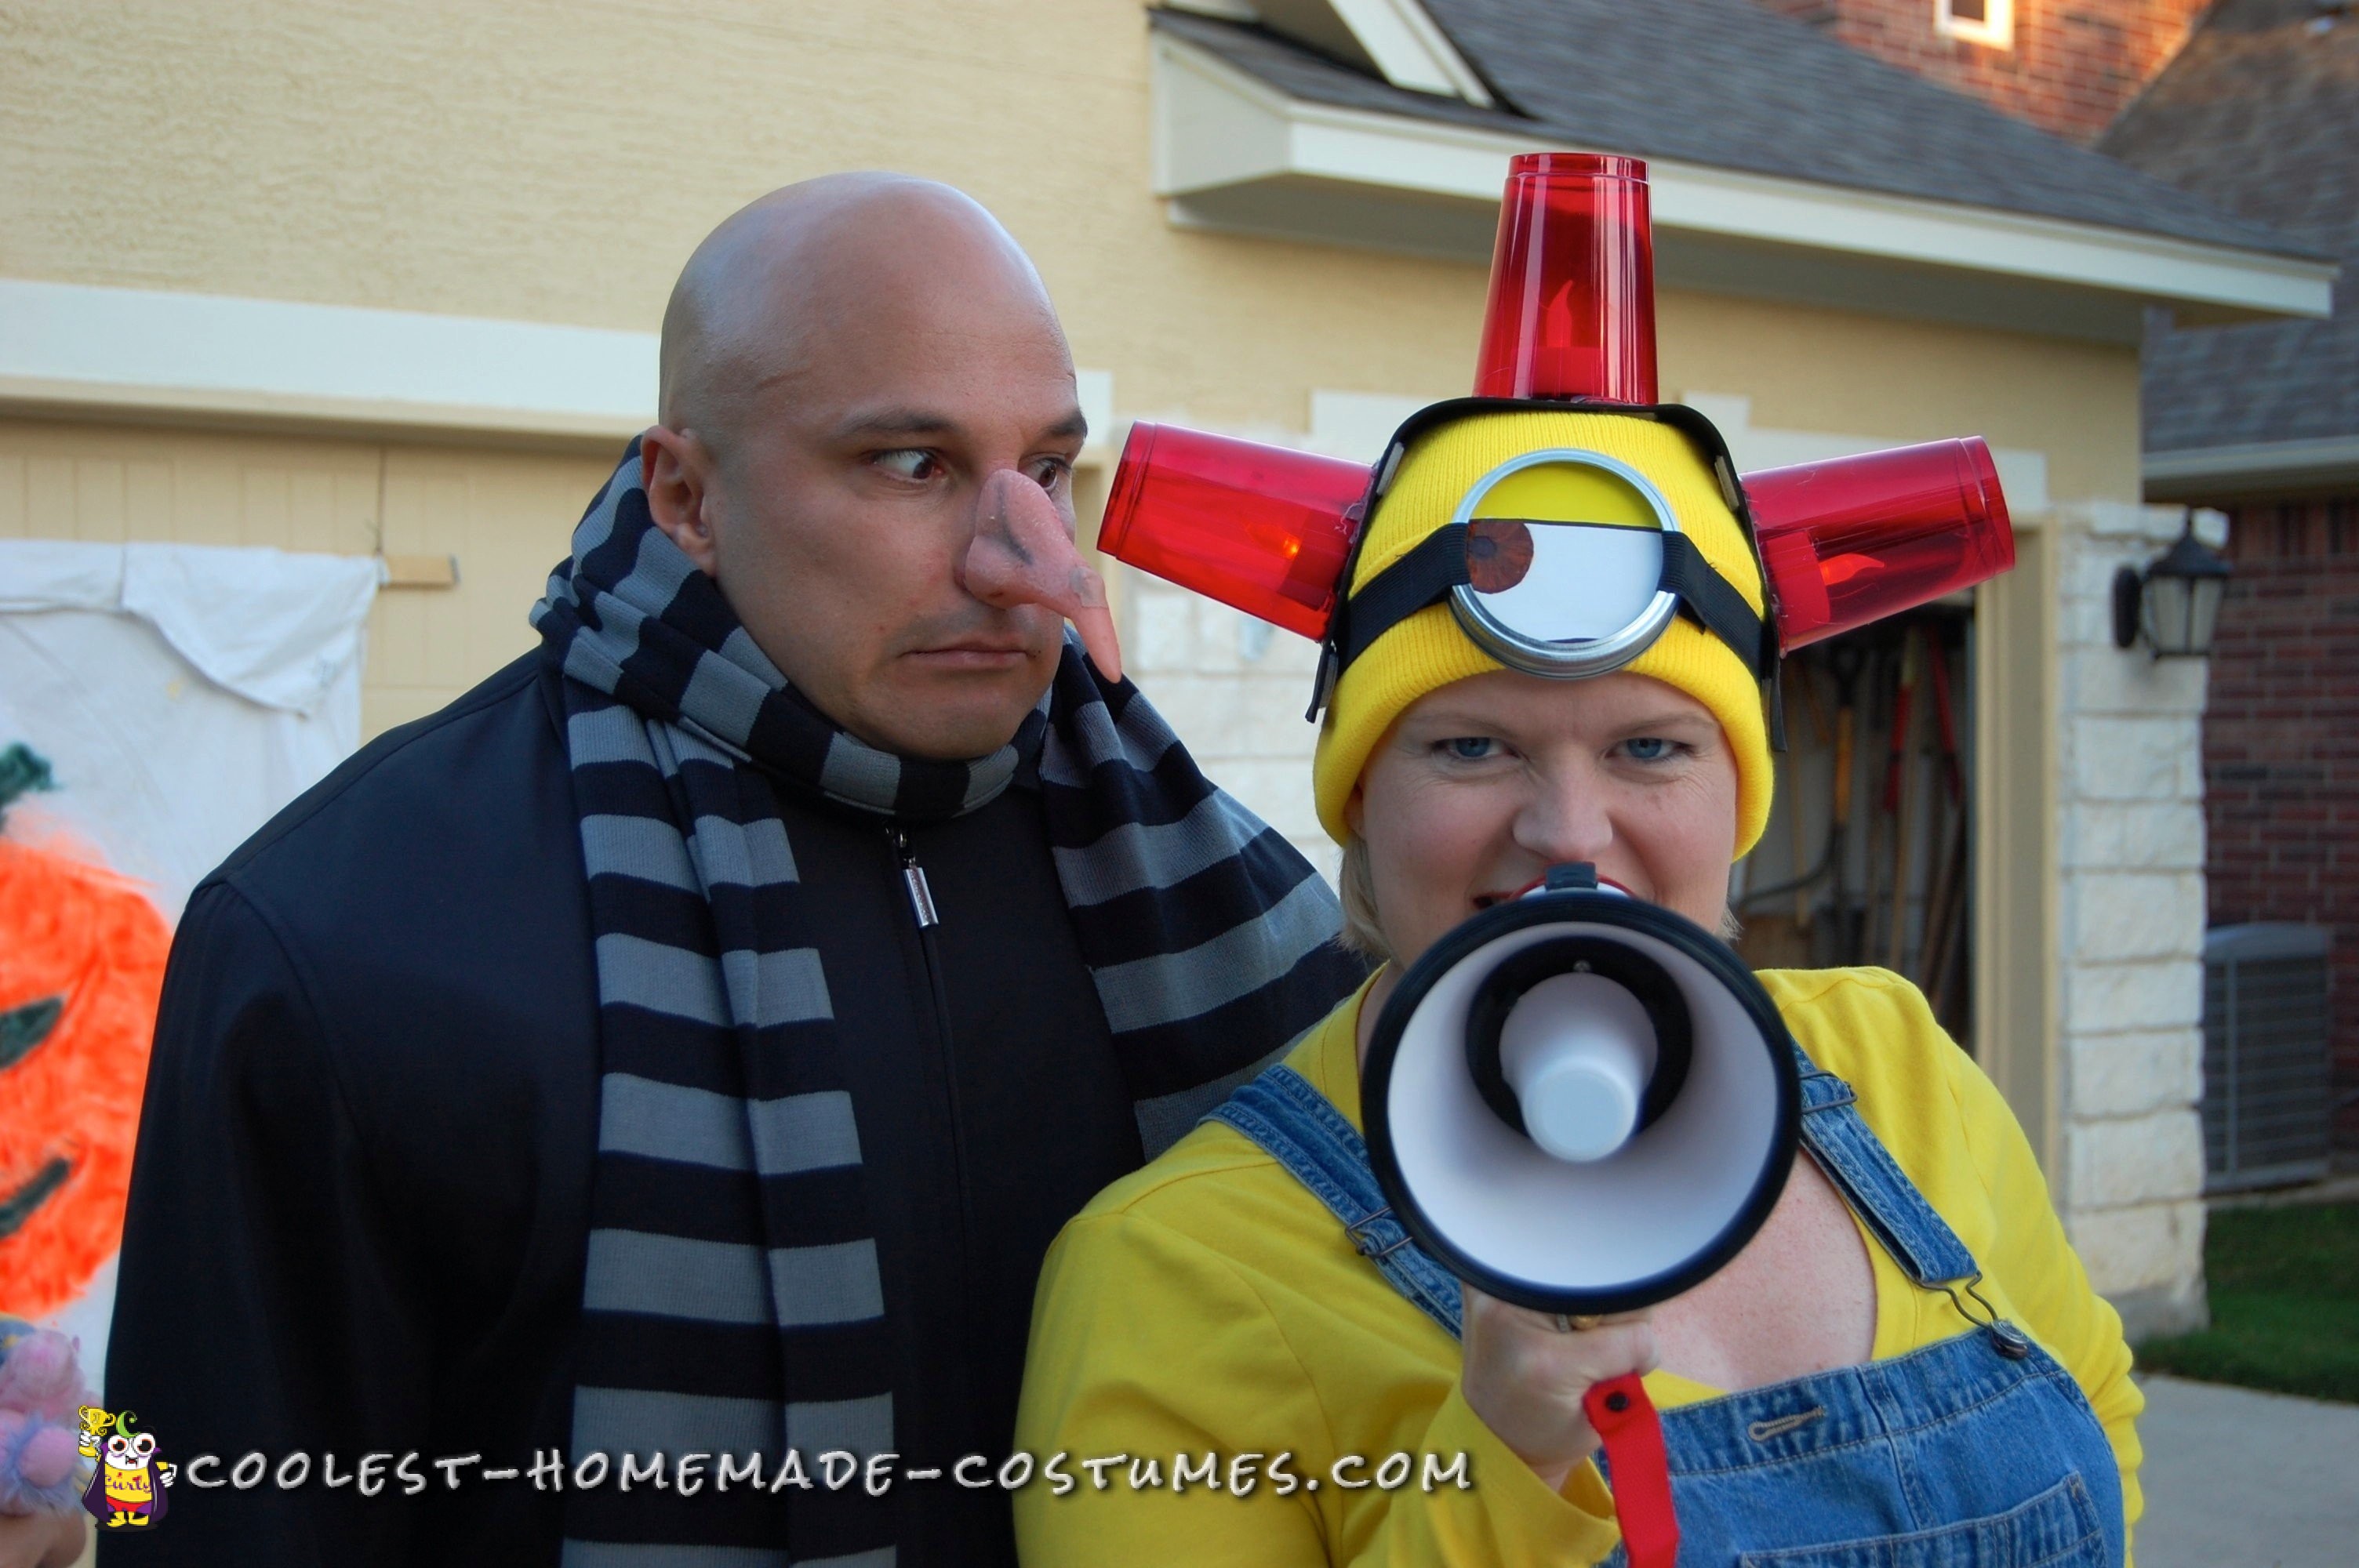 Adorable Despicable Me Family Costume